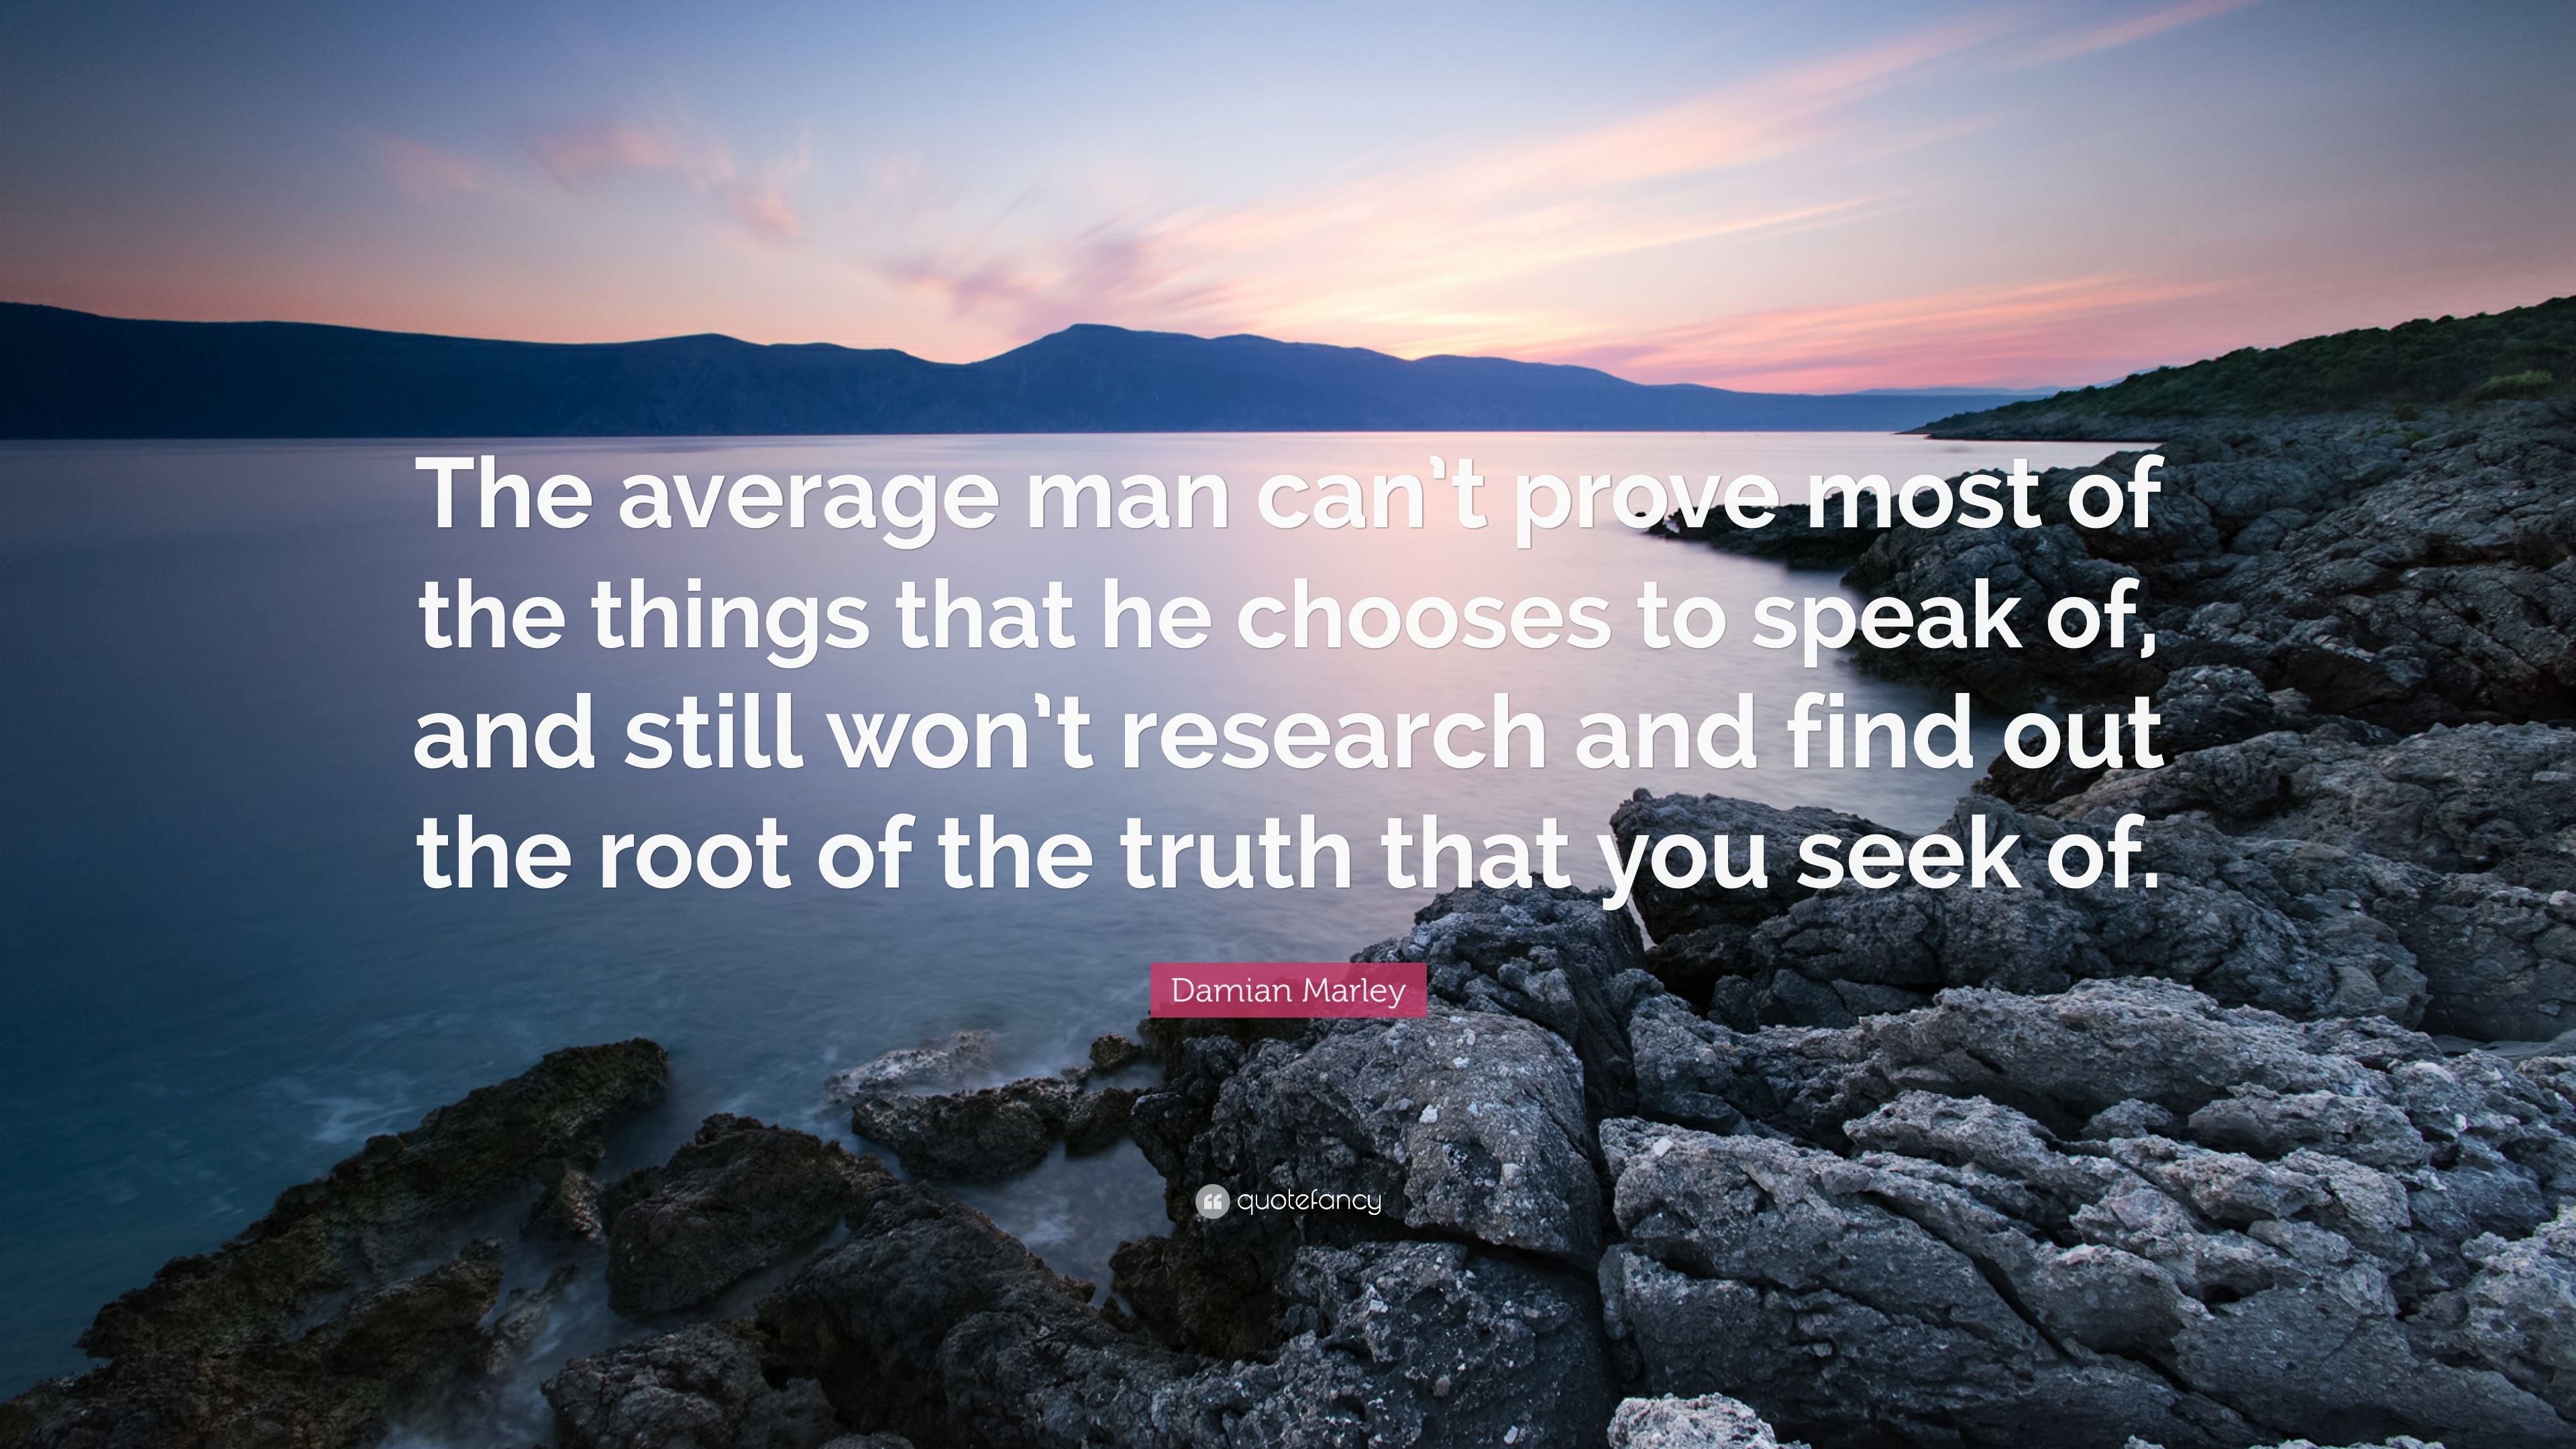 3840x2160 Damian Marley Quote: “The average man can't prove most of the things